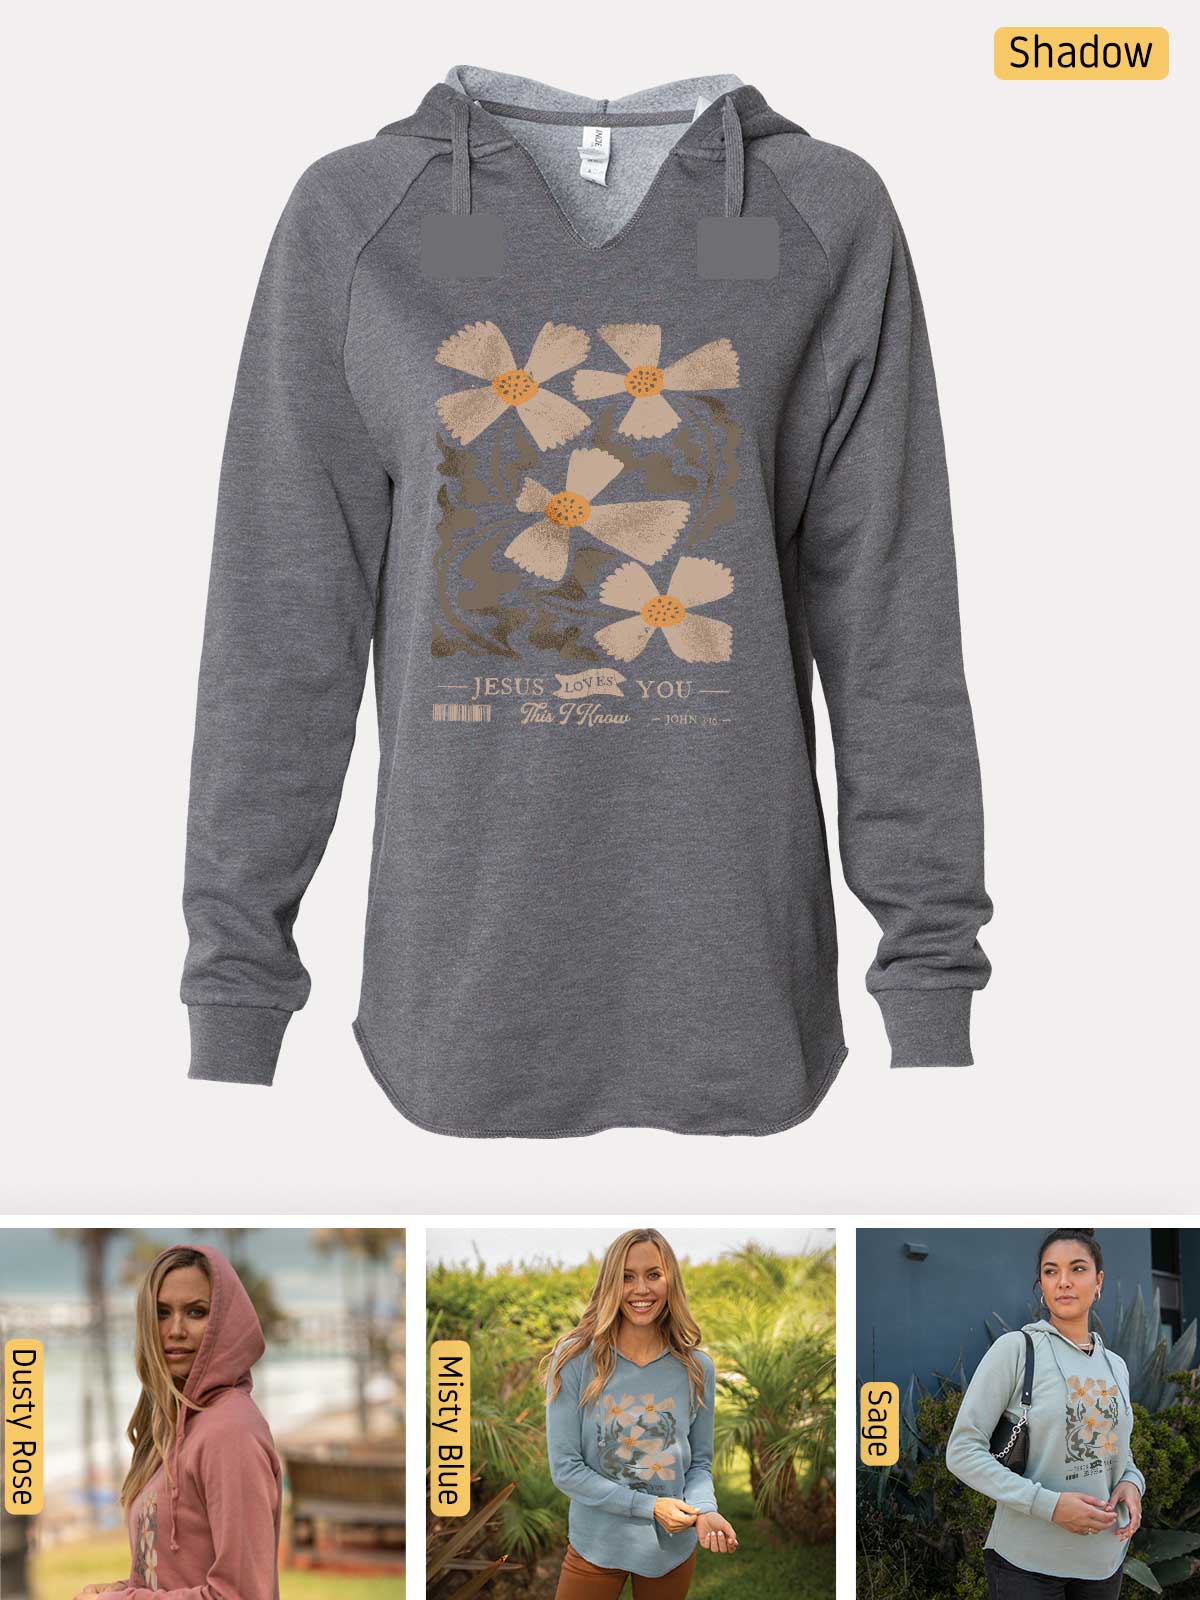 a women's sweatshirt with a picture of flowers on it